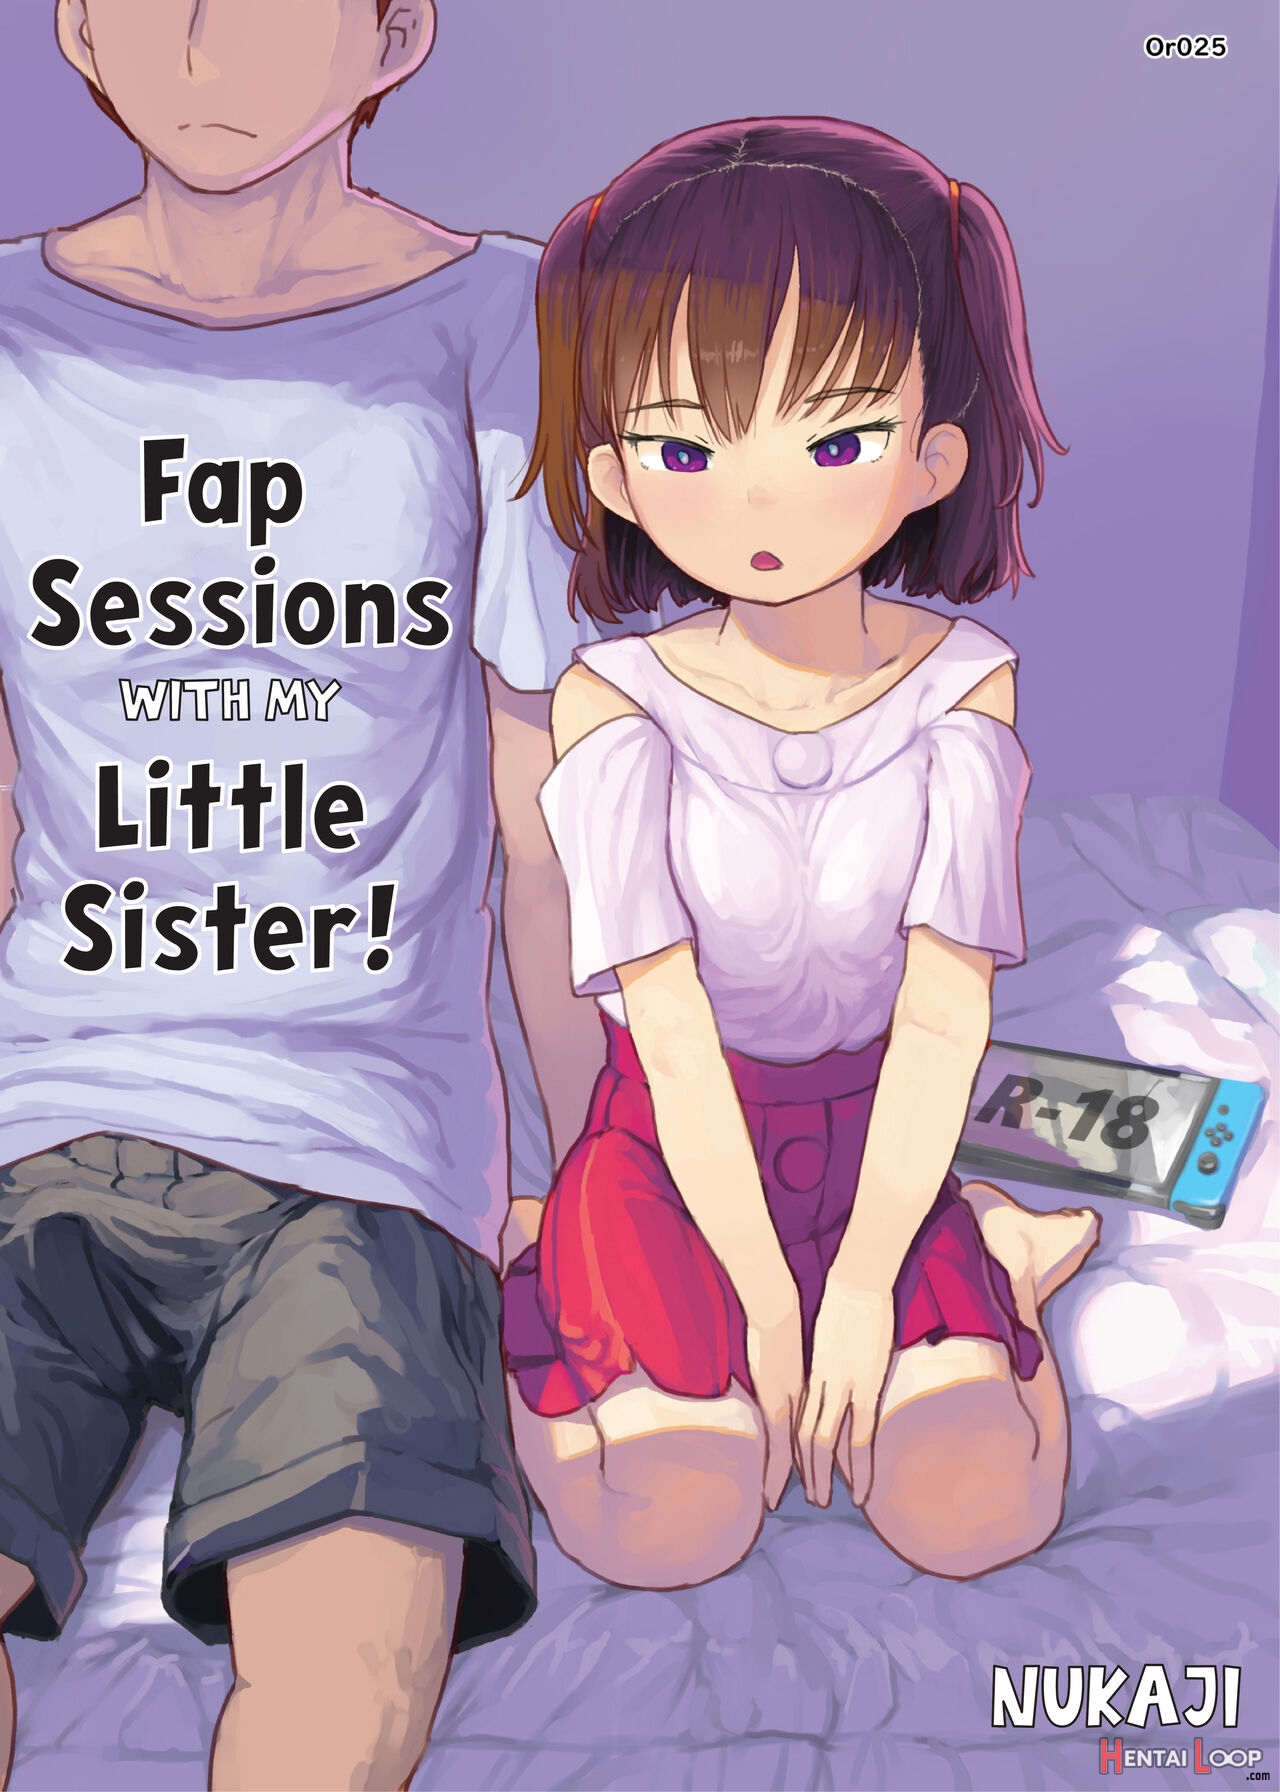 Fap Sessions With My Little Sister! page 1